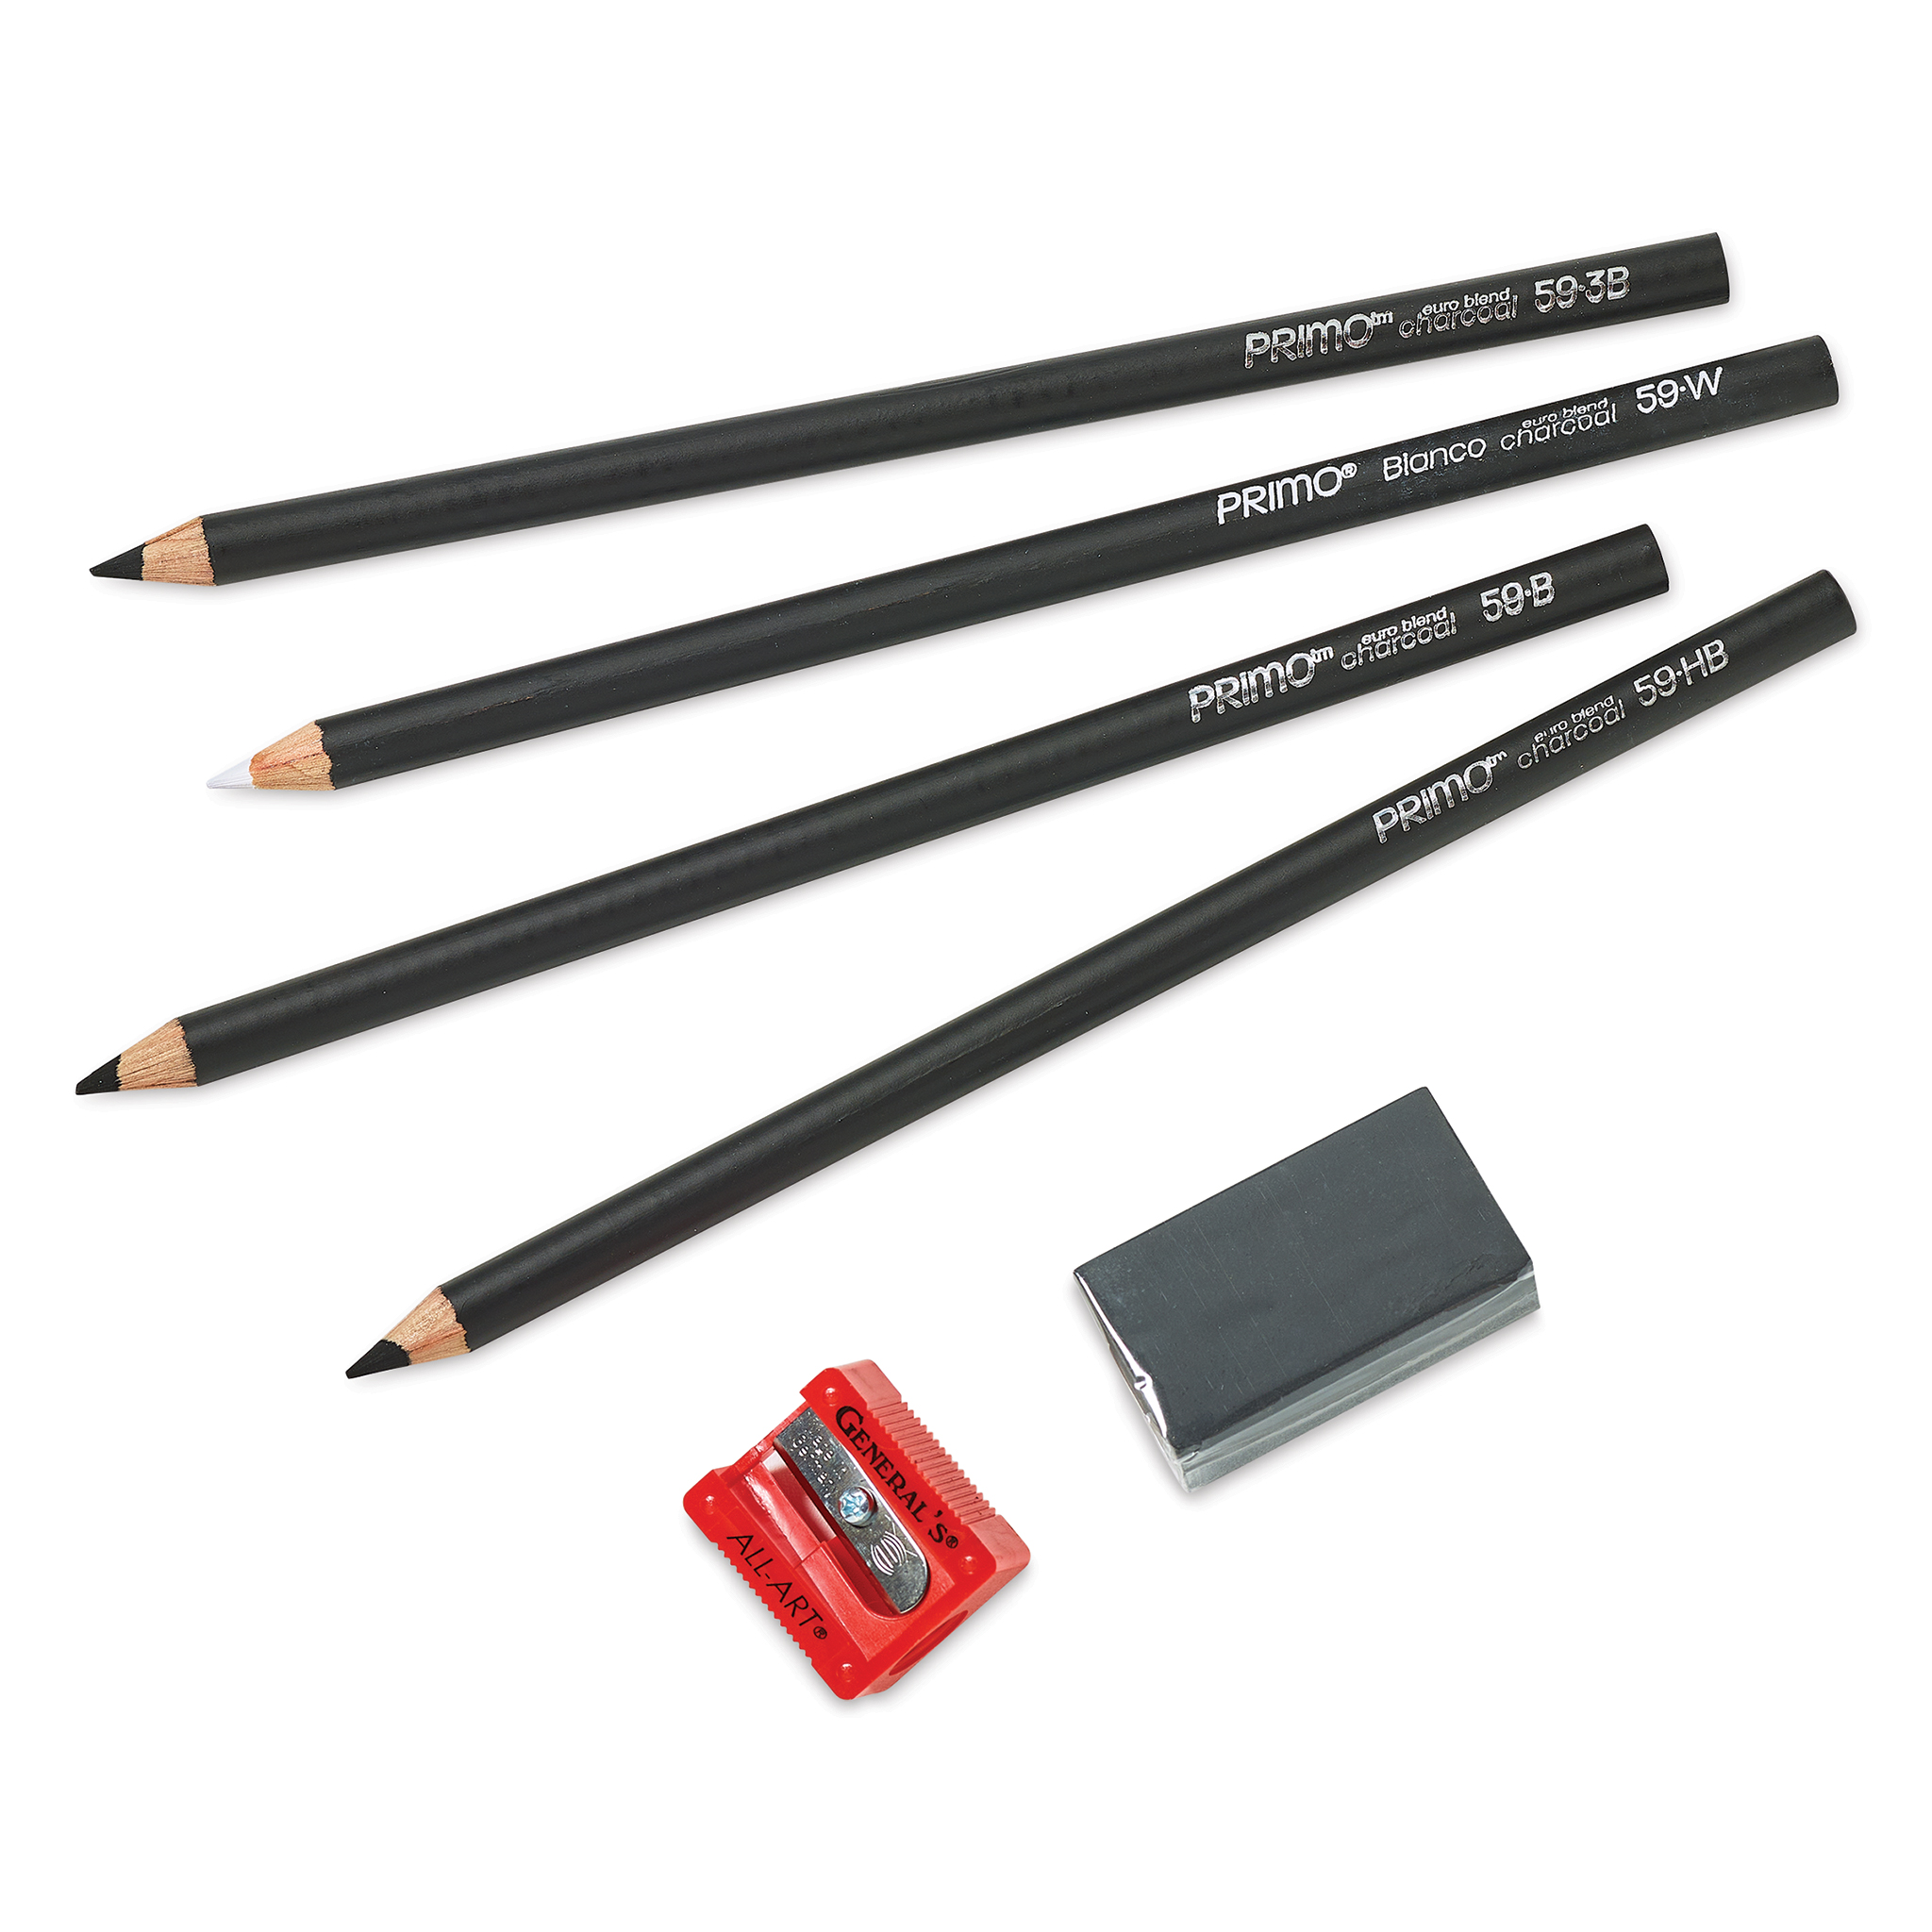 General Pencil Primo Euro Blend Charcoal Drawing Set 